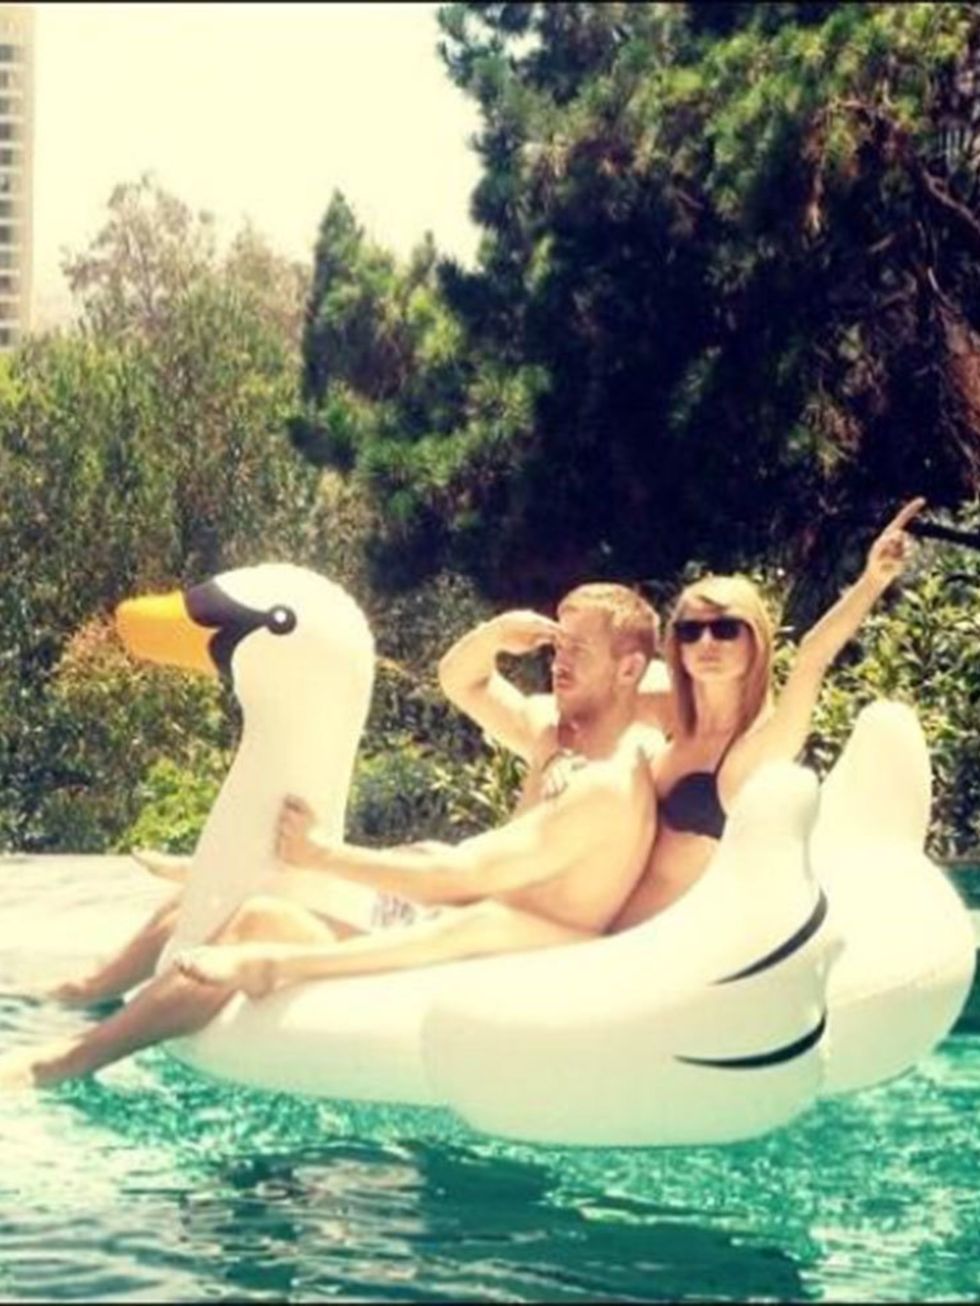 Who could forget the picture that spawned a million swan float sales?